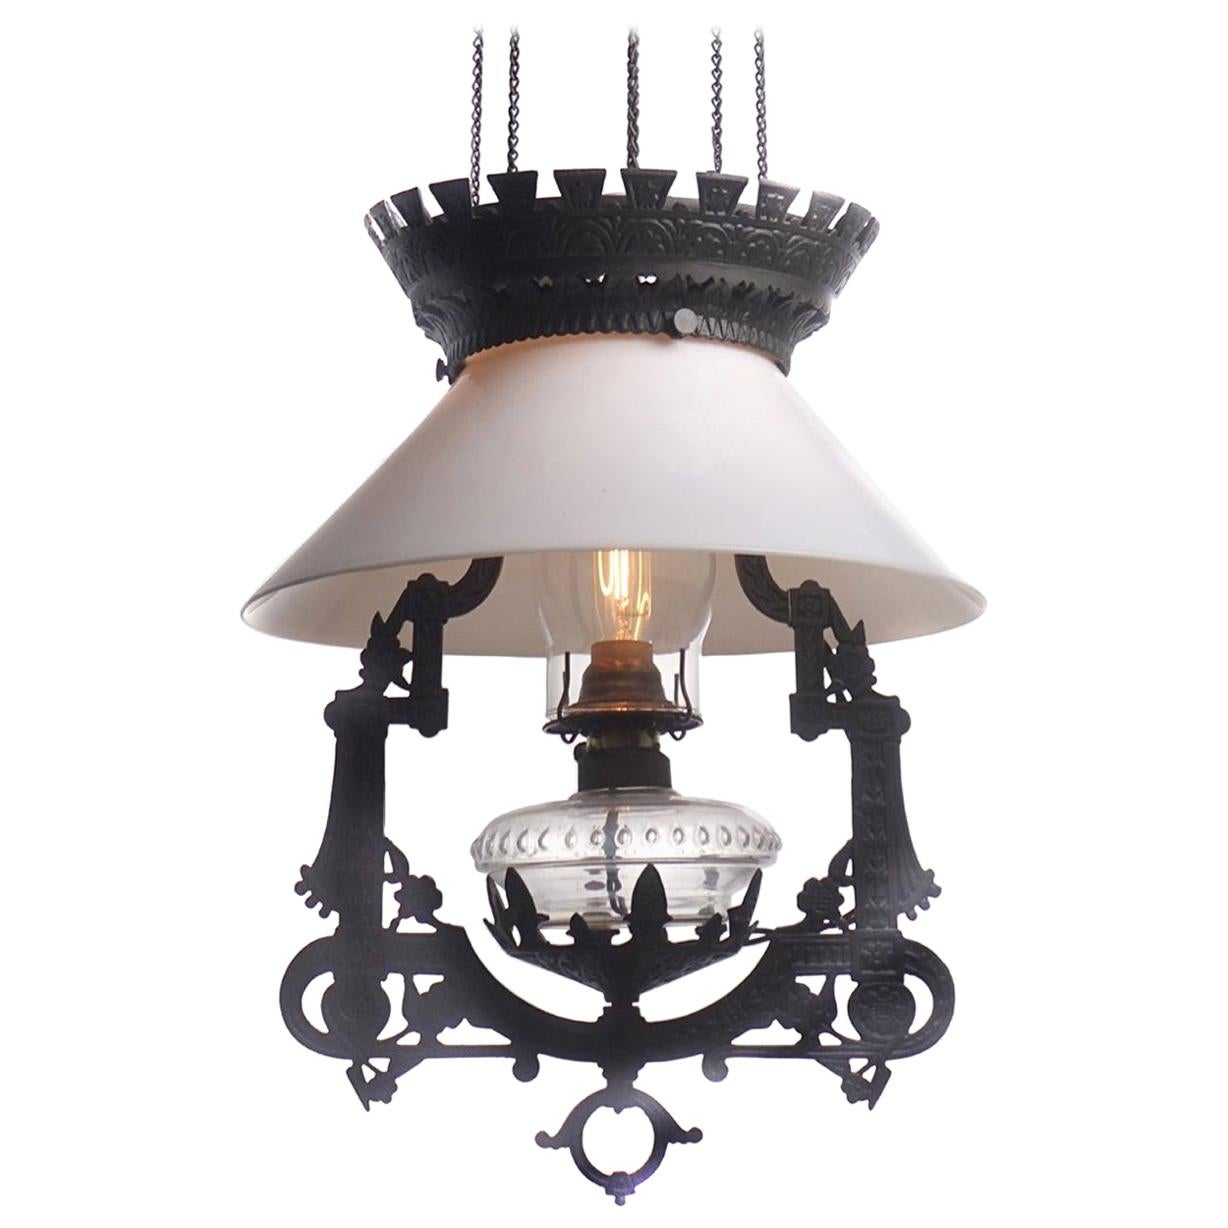 Electrified 1876 Bradley and Hubbard Rise and Fall Lamp